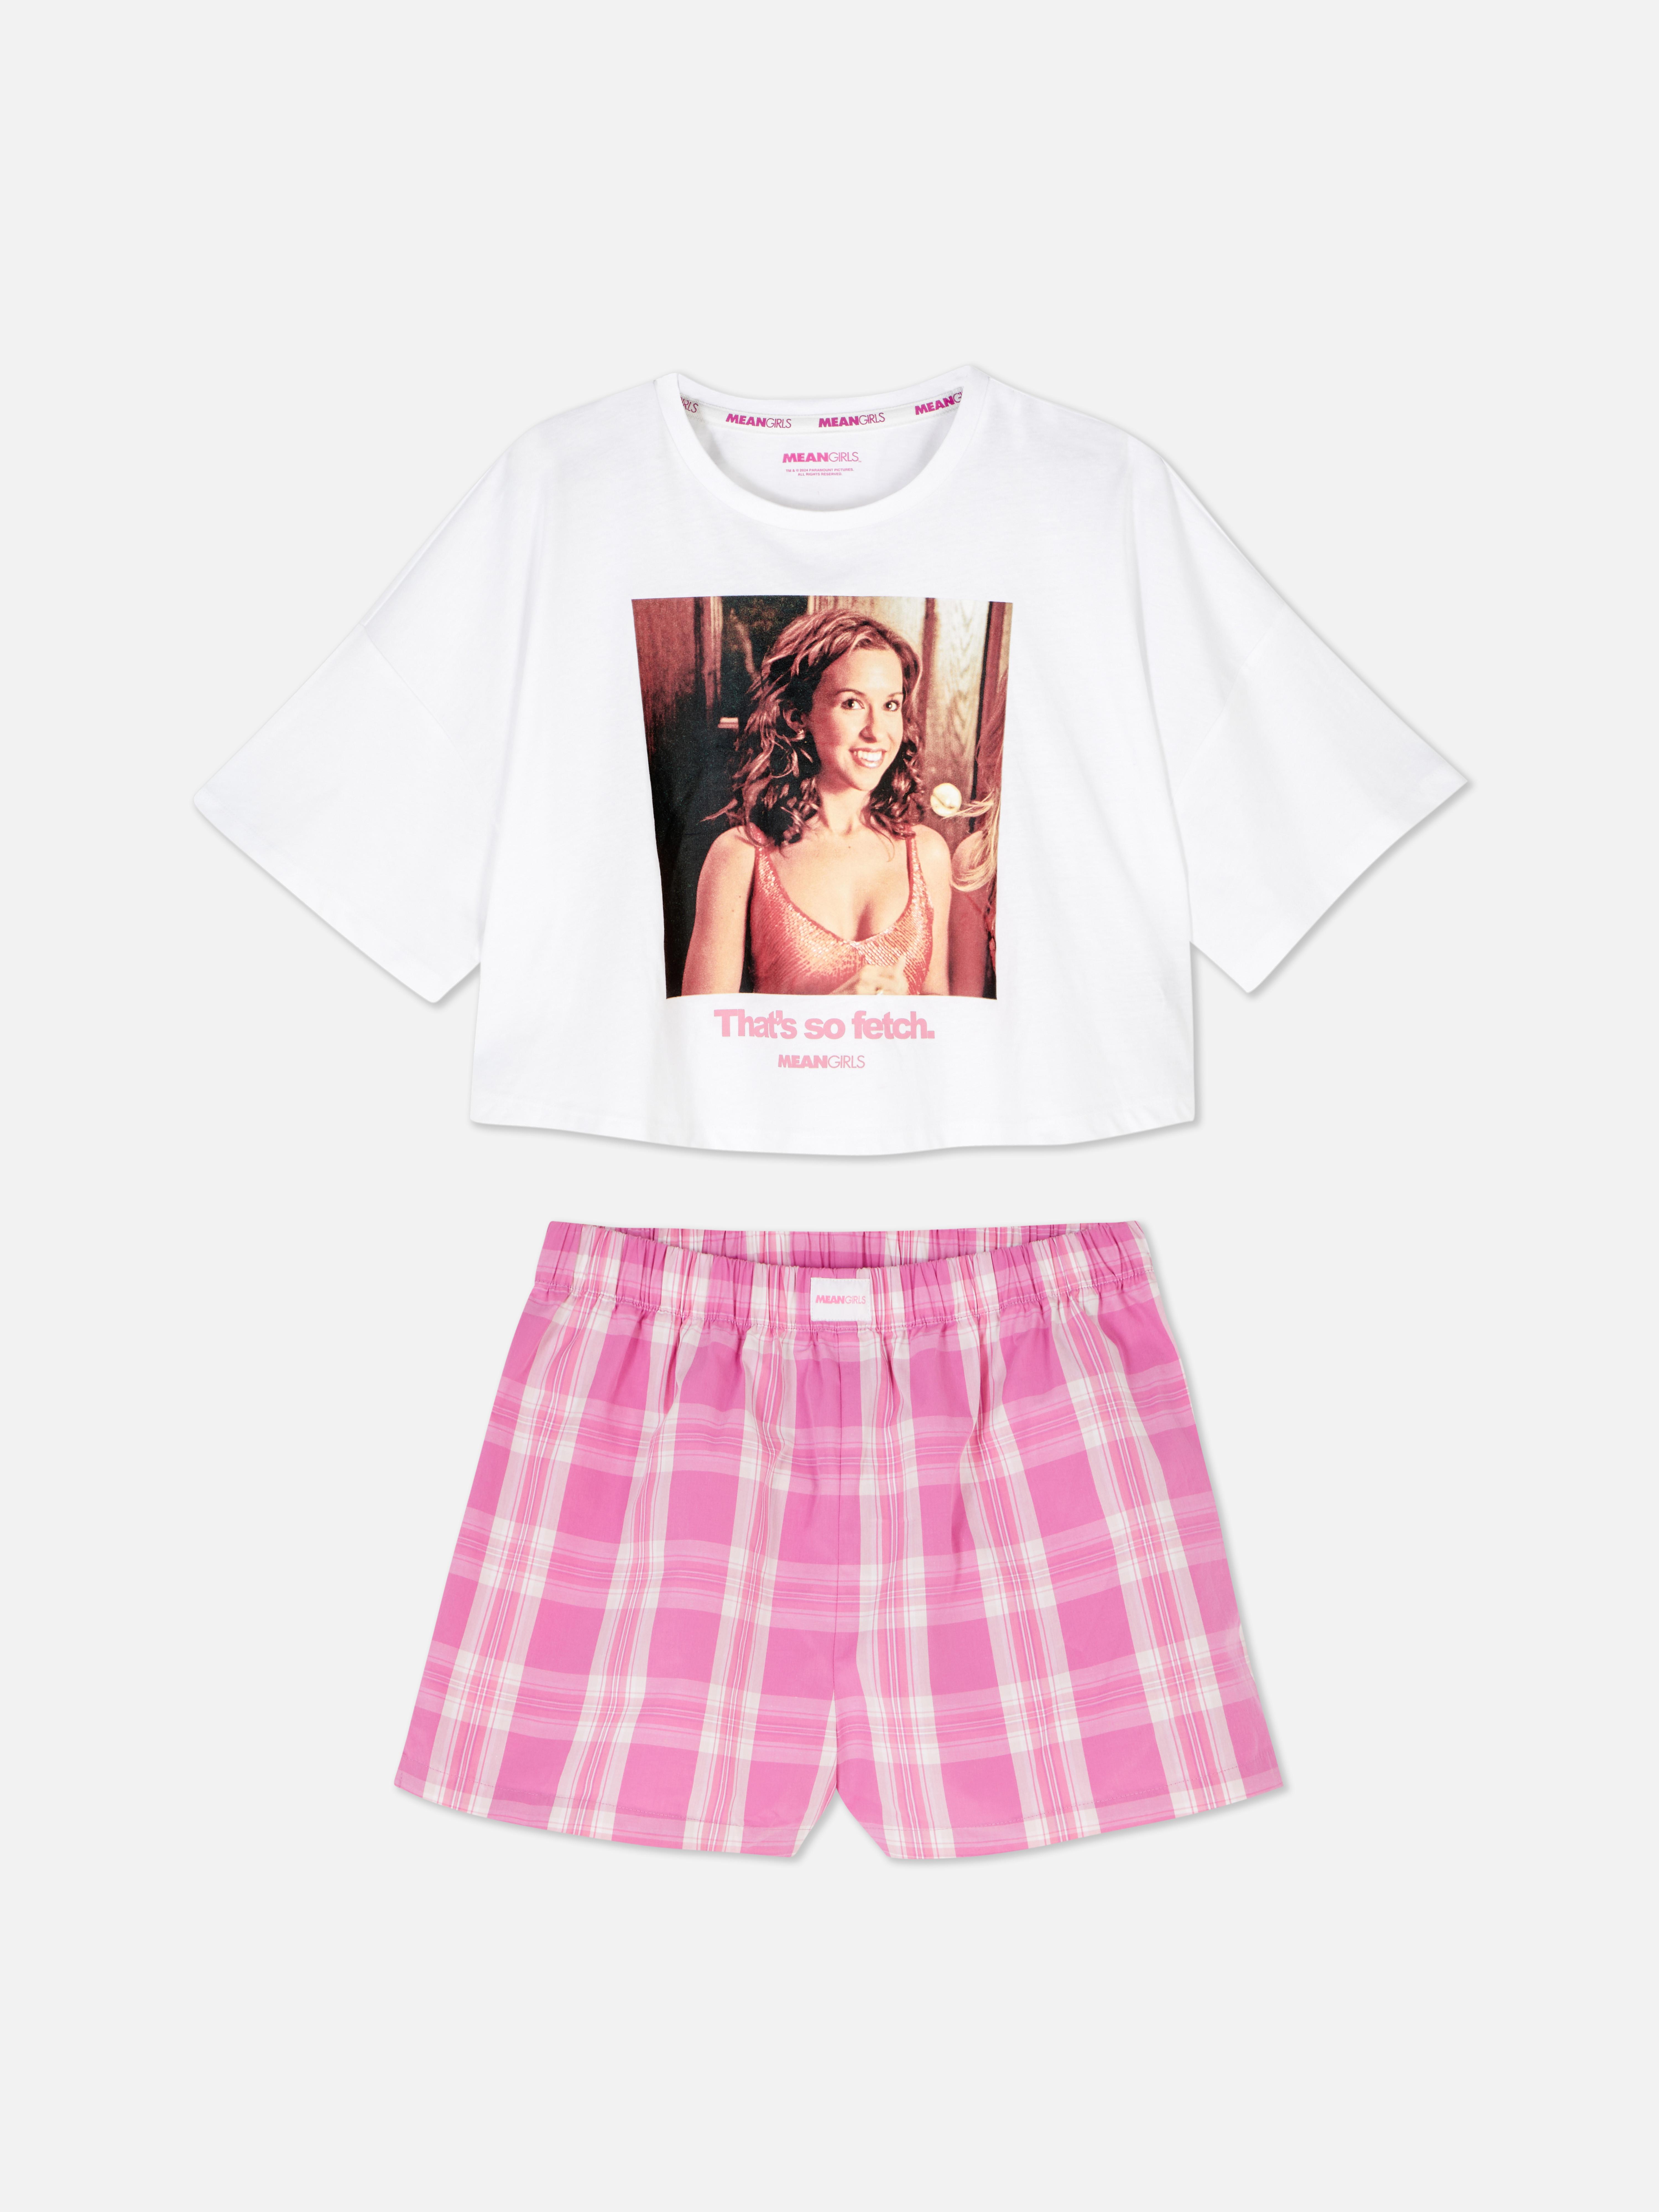 Primark Launches Mean Girls Pyjamas and They're SO Fetch